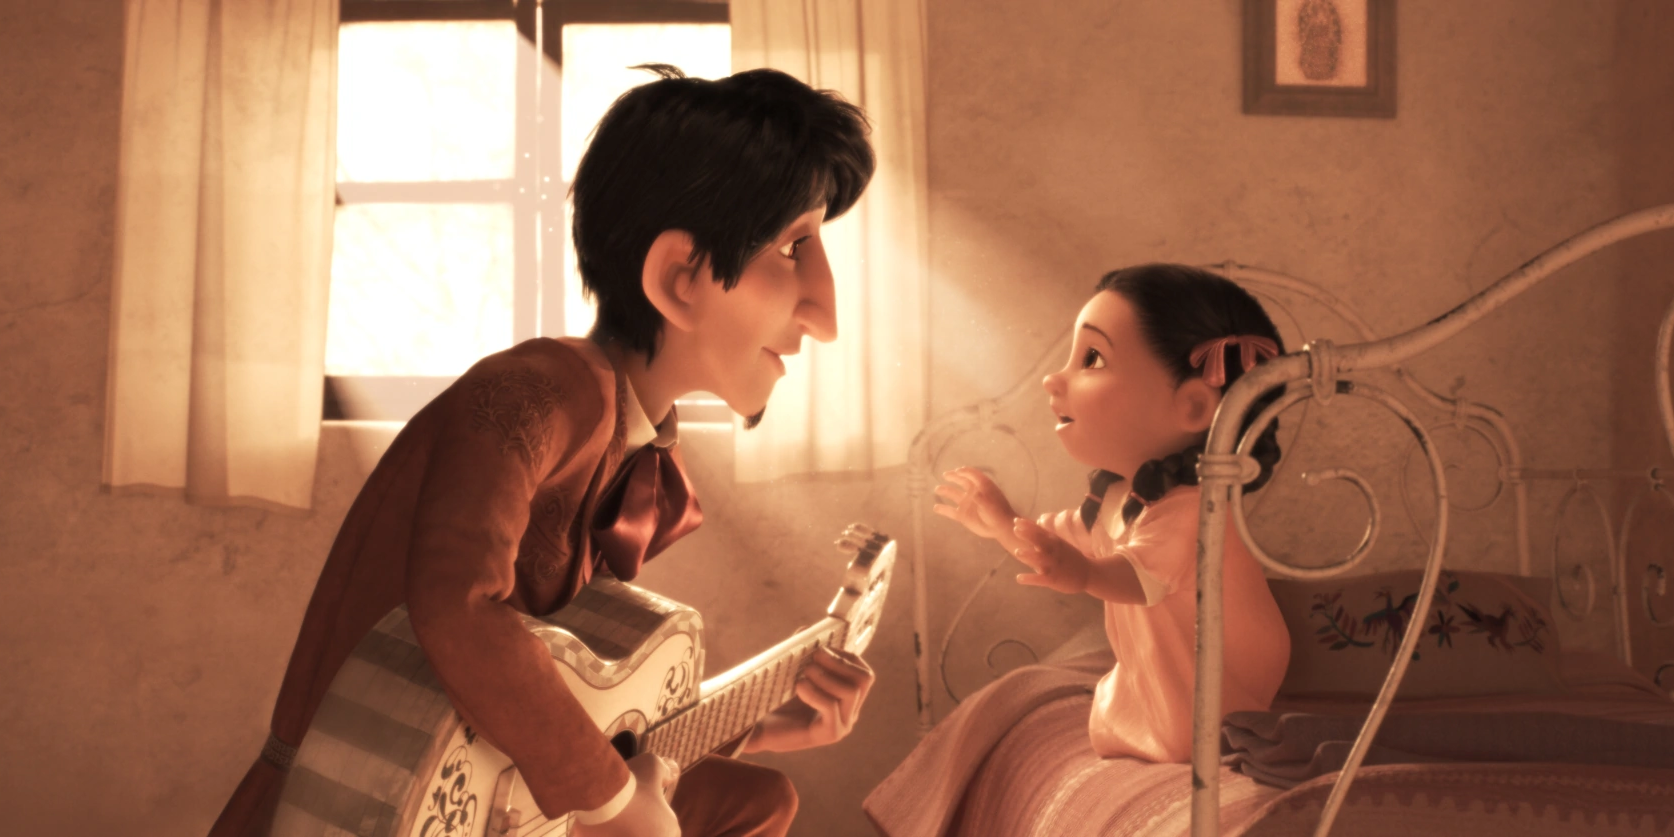 Hector singing to a young Coco in Coco